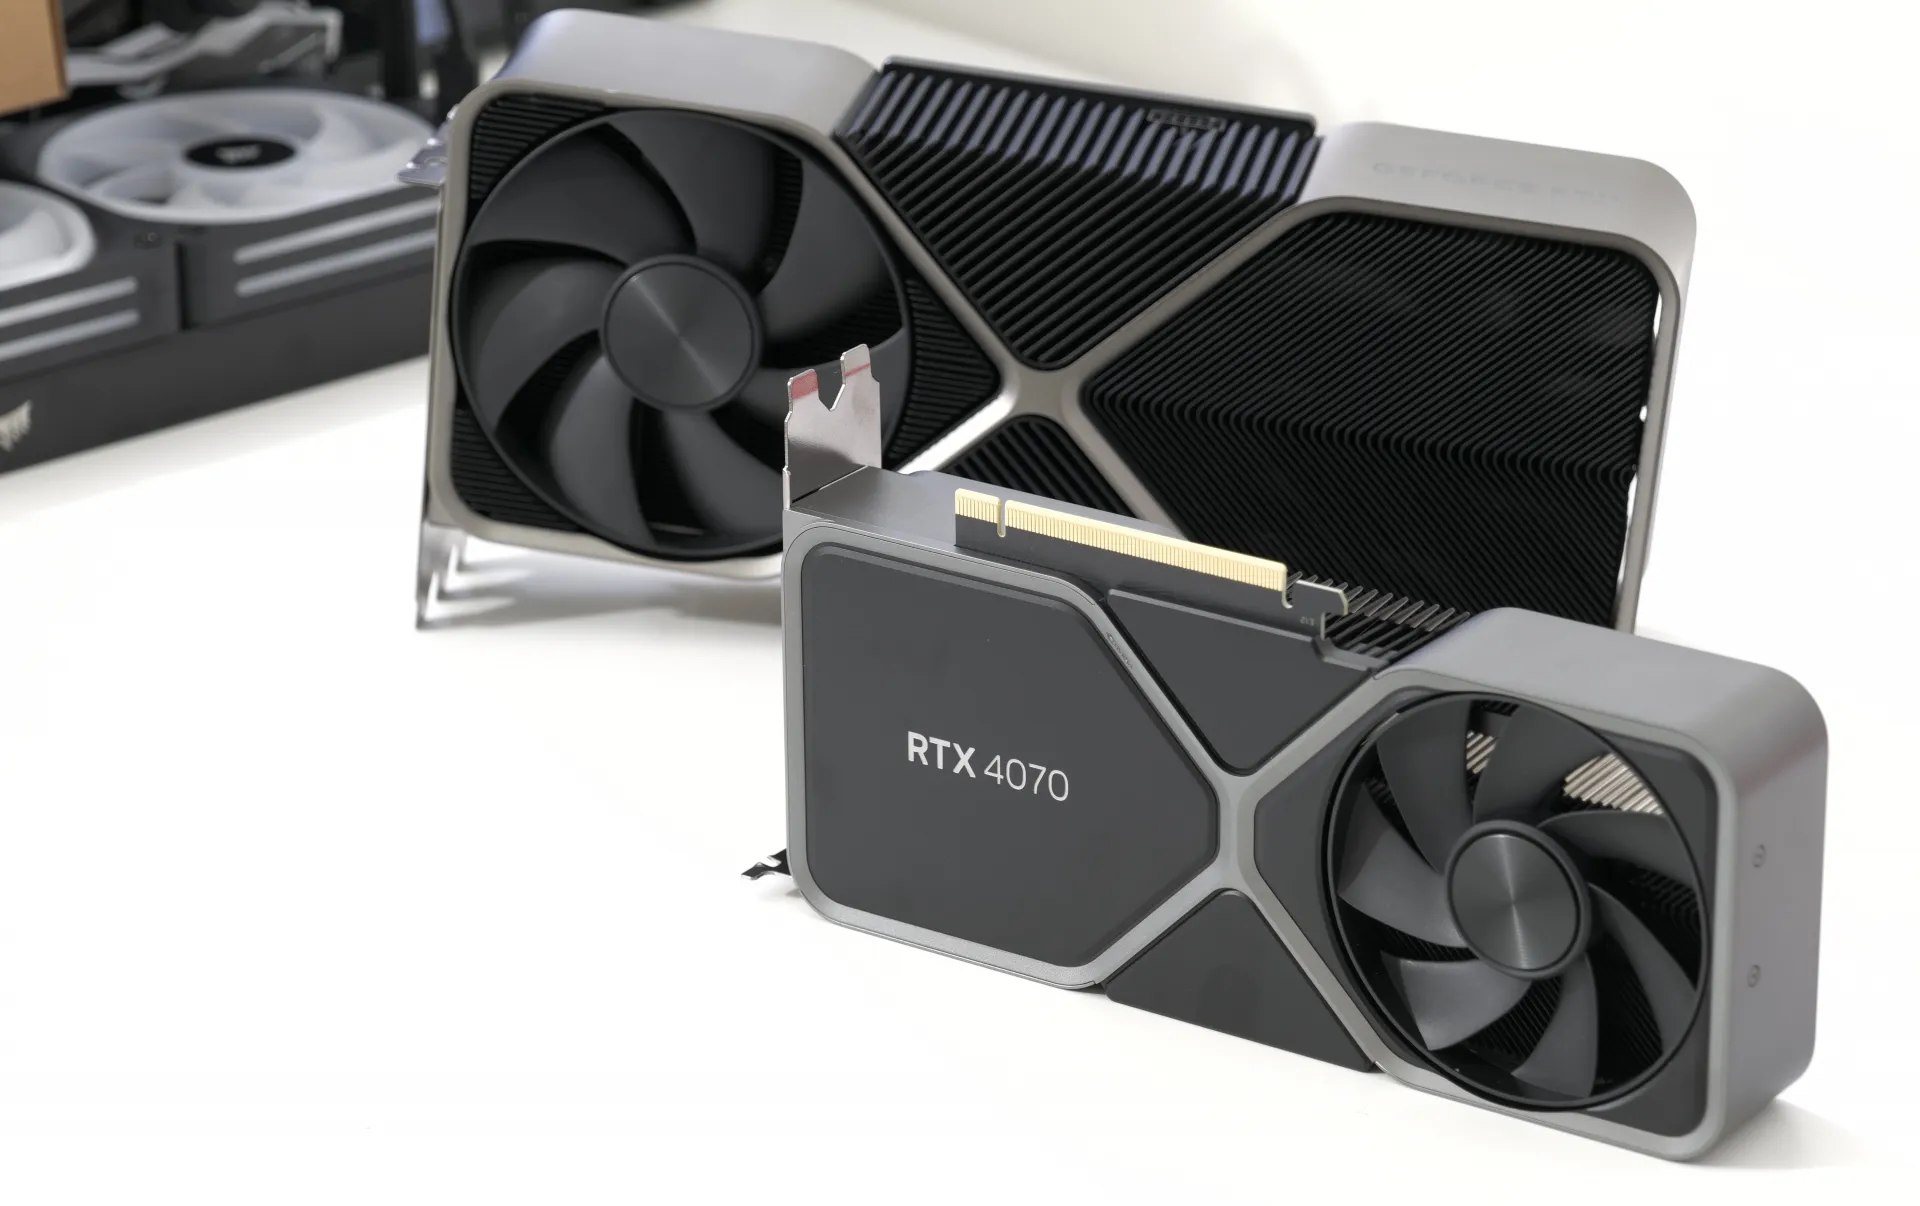 Nvidia GeForce RTX 4070 Ti SUPER Graphics Card Packaging and Specs